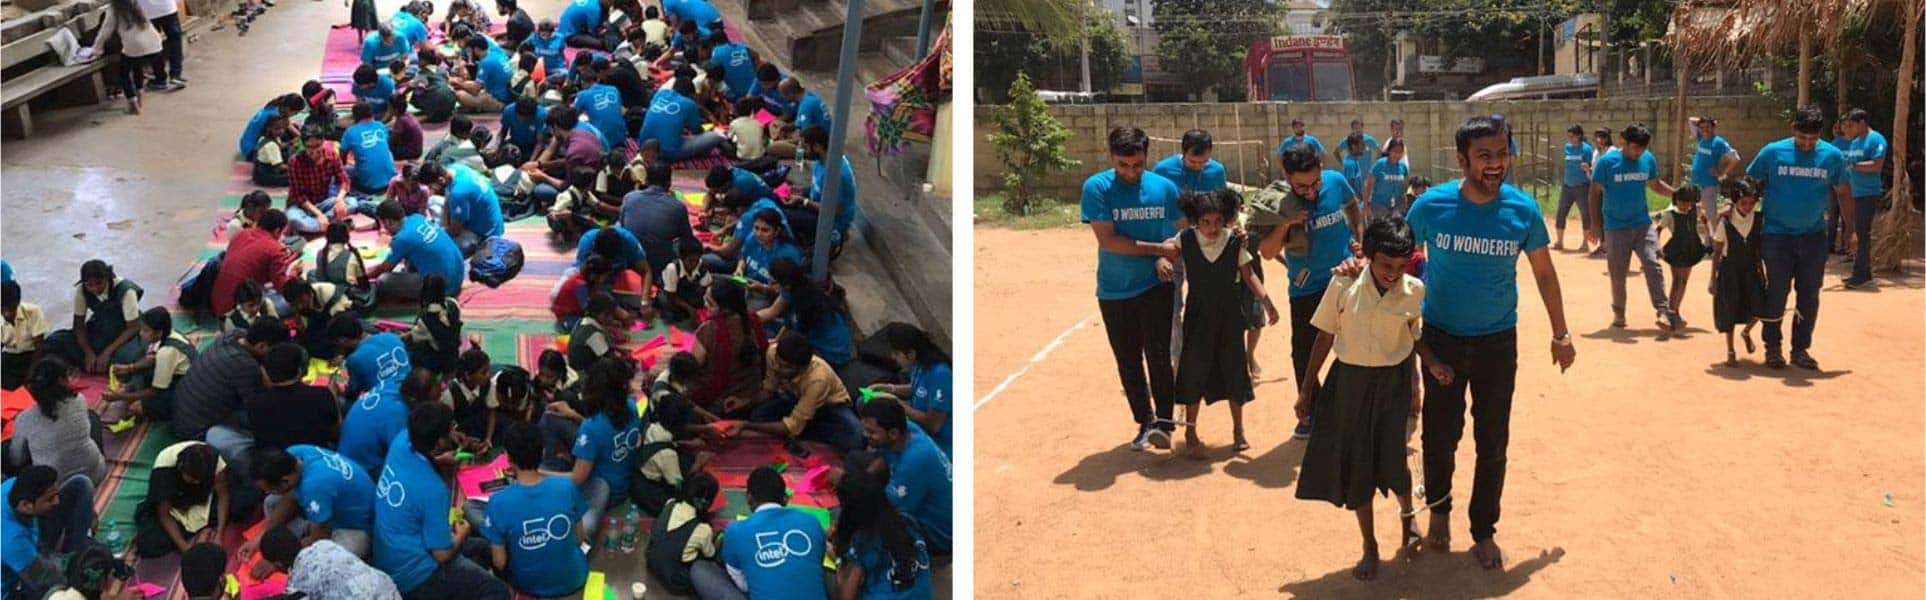 Intel Employees spend a fun day at Mission Education center